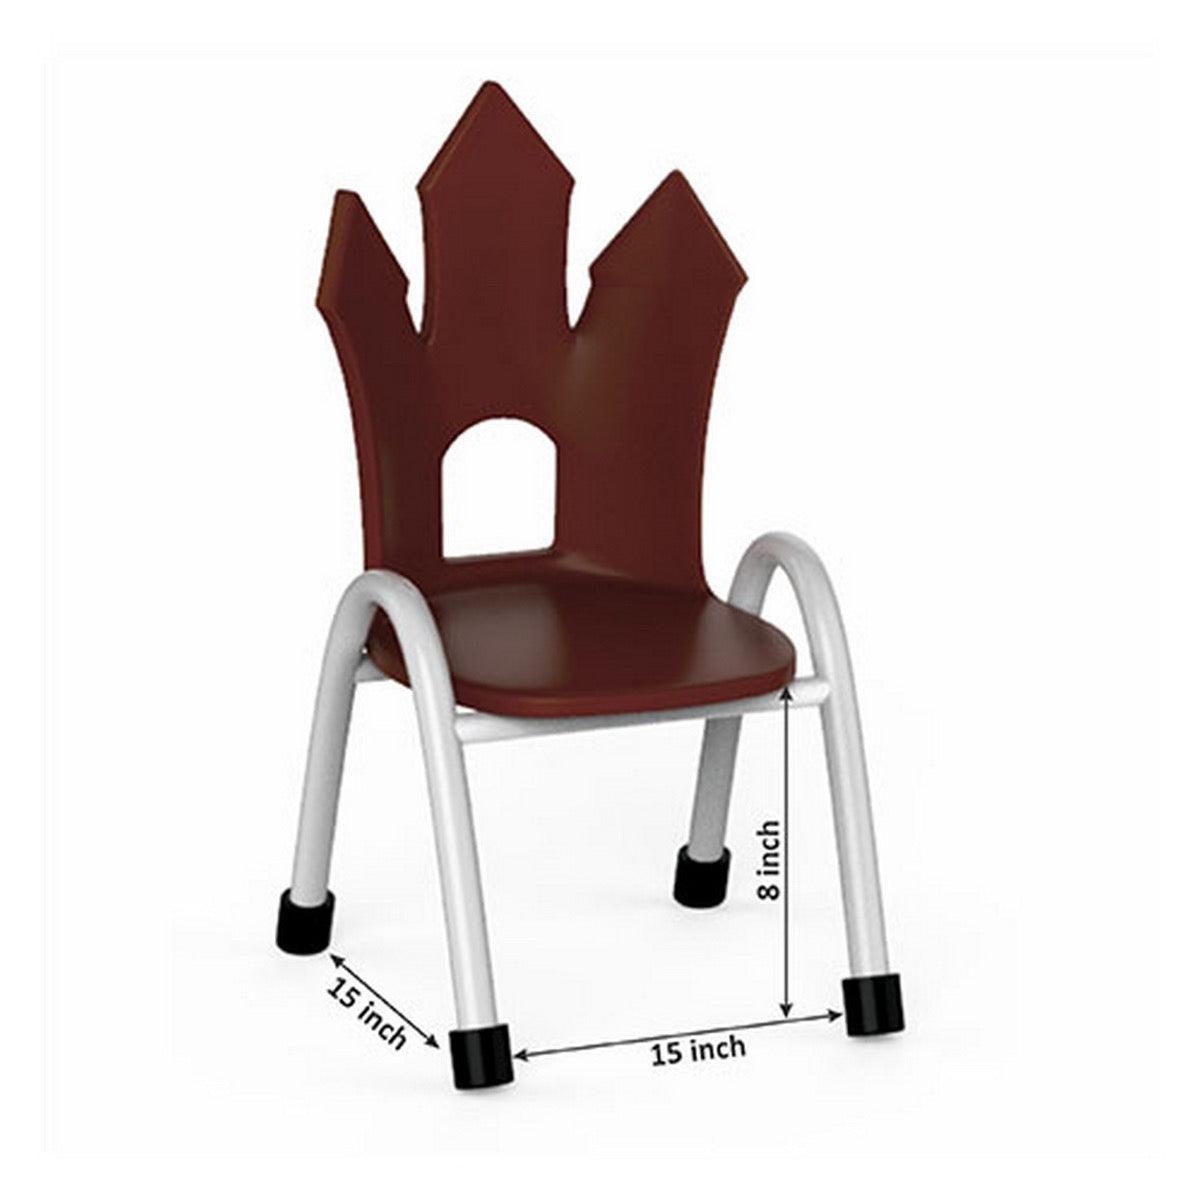 Ok Play Castle Chair, Study Chair, Sturdy And Durable Chair, Plastic Chair, Perfect For Home, Creches And School, Brown, 2 to 4 Years, Height 8 Inches